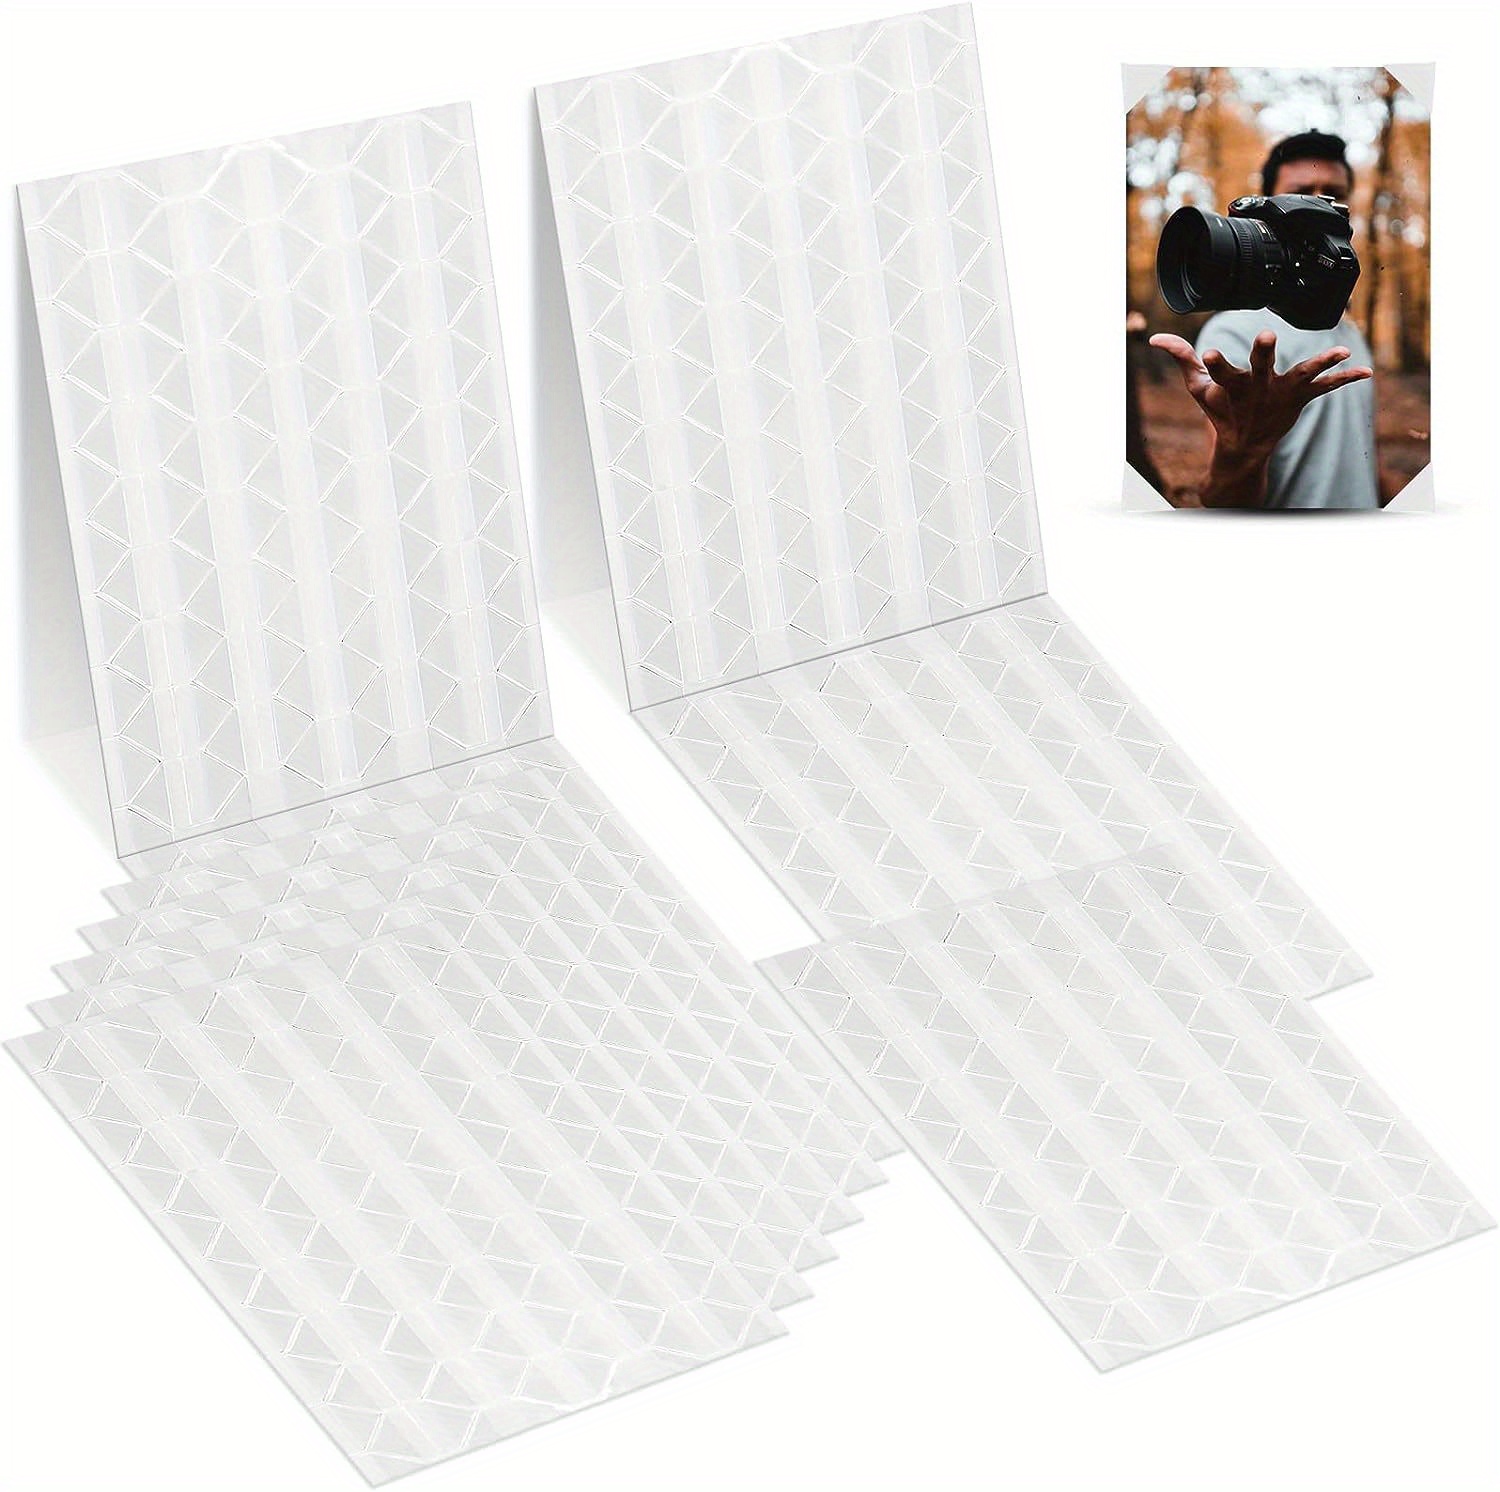 12 Sheets 288 Pcs Picture Corners for Scrapbooking,Self Adhesive